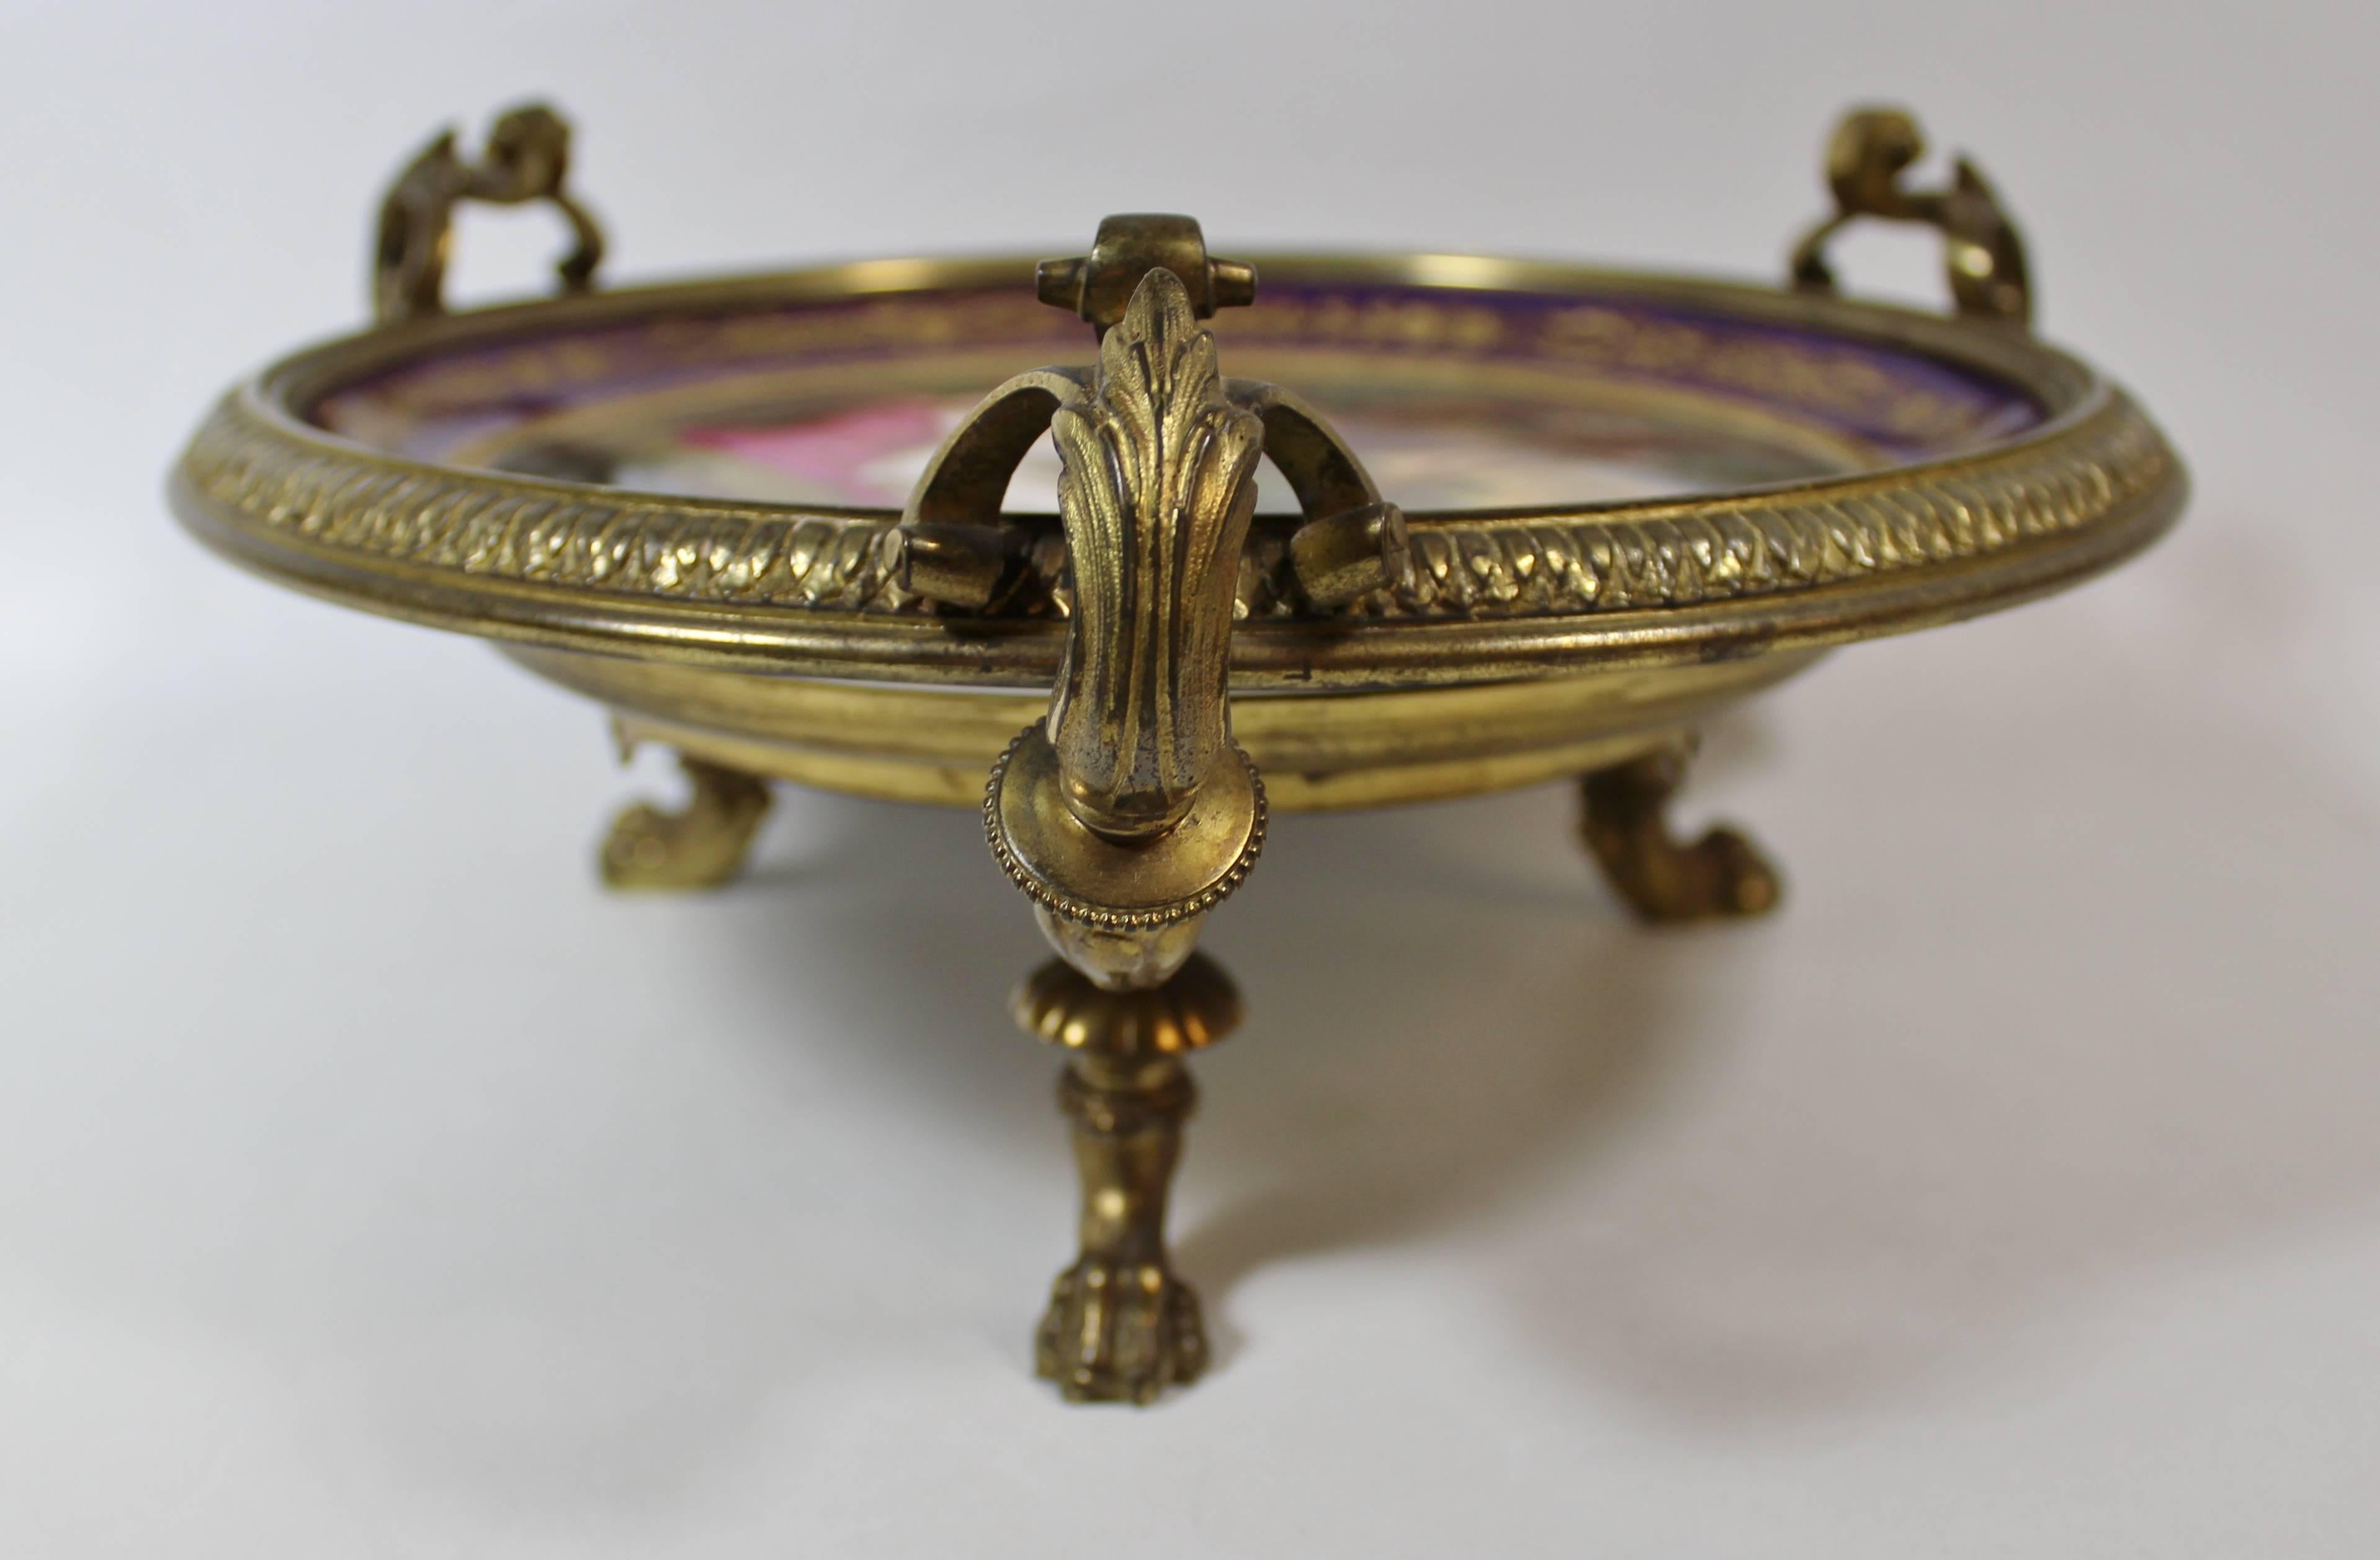 Royal Vienna style hand-painted plate in gilt bronze stand.

It is titled 